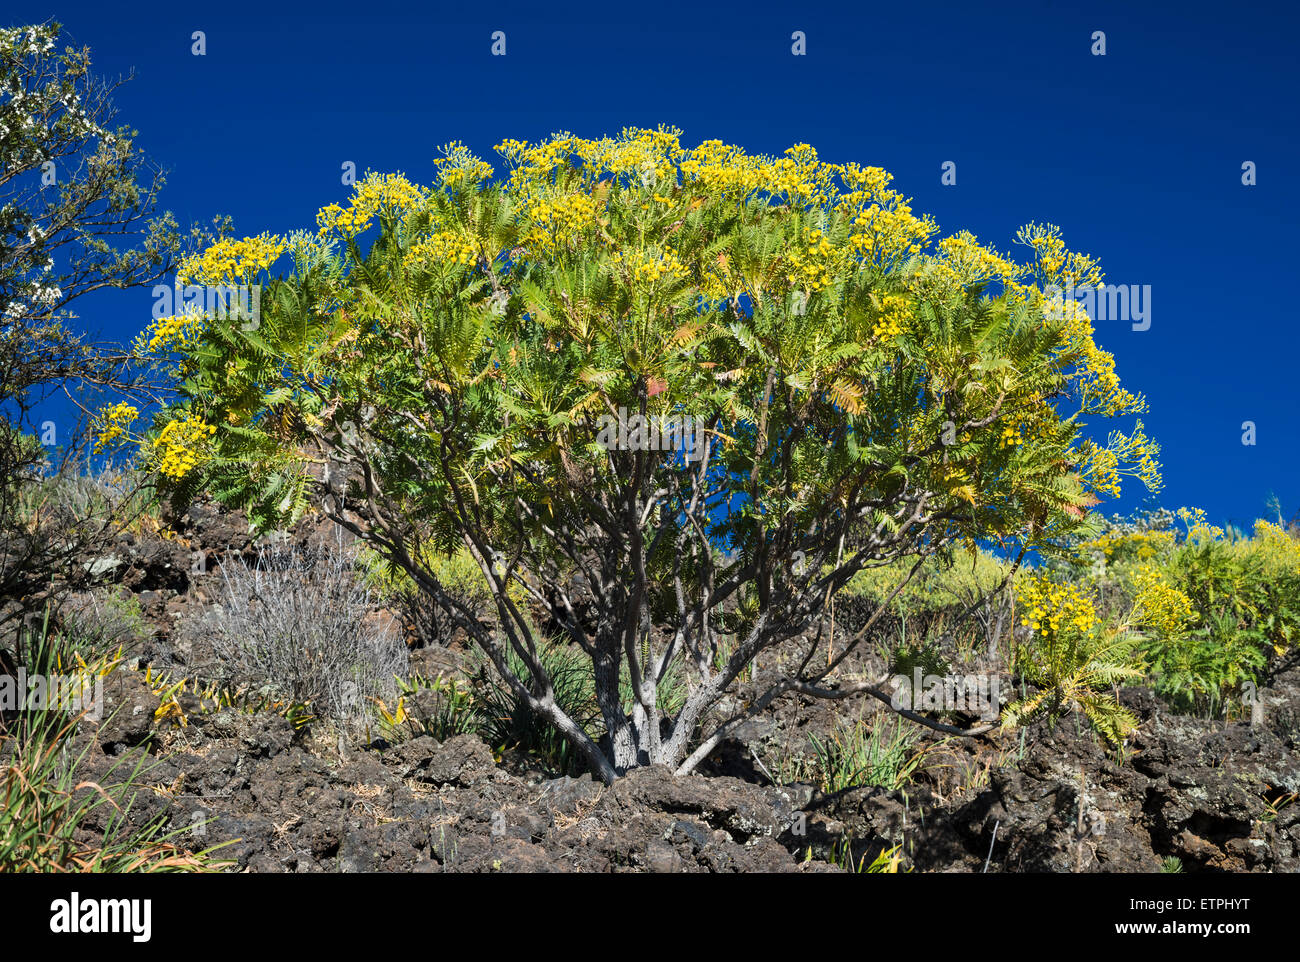 Sonchus canariensis (cerraja, tree sow thistle), a Canarian endemic, flowering in spring on lava on Montana Bilma,Tenerife Stock Photo